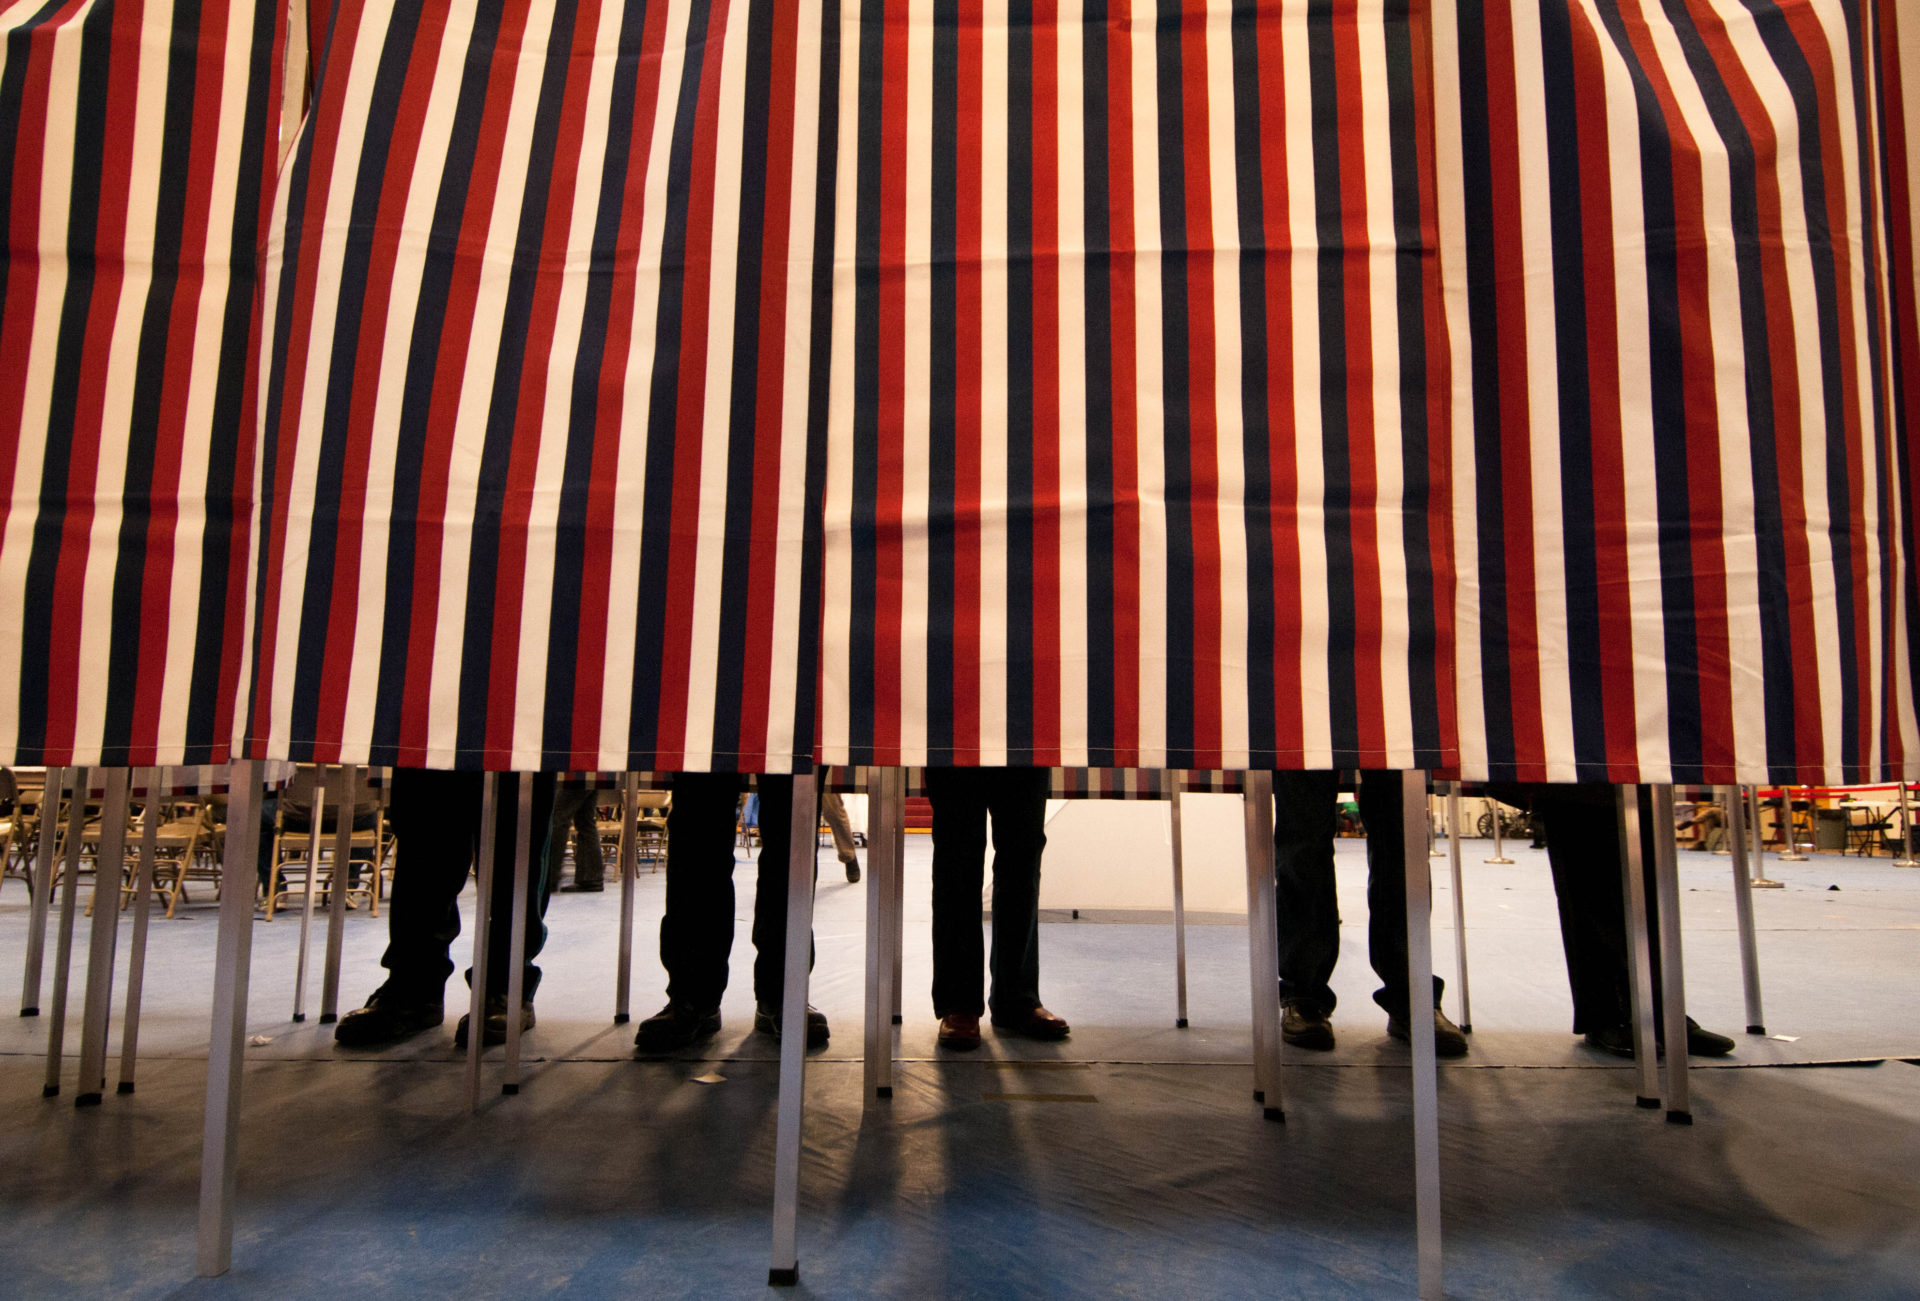 In Wake of Midterm Elections, 'Experts' Vehemently Oppose Blockchain in Voting